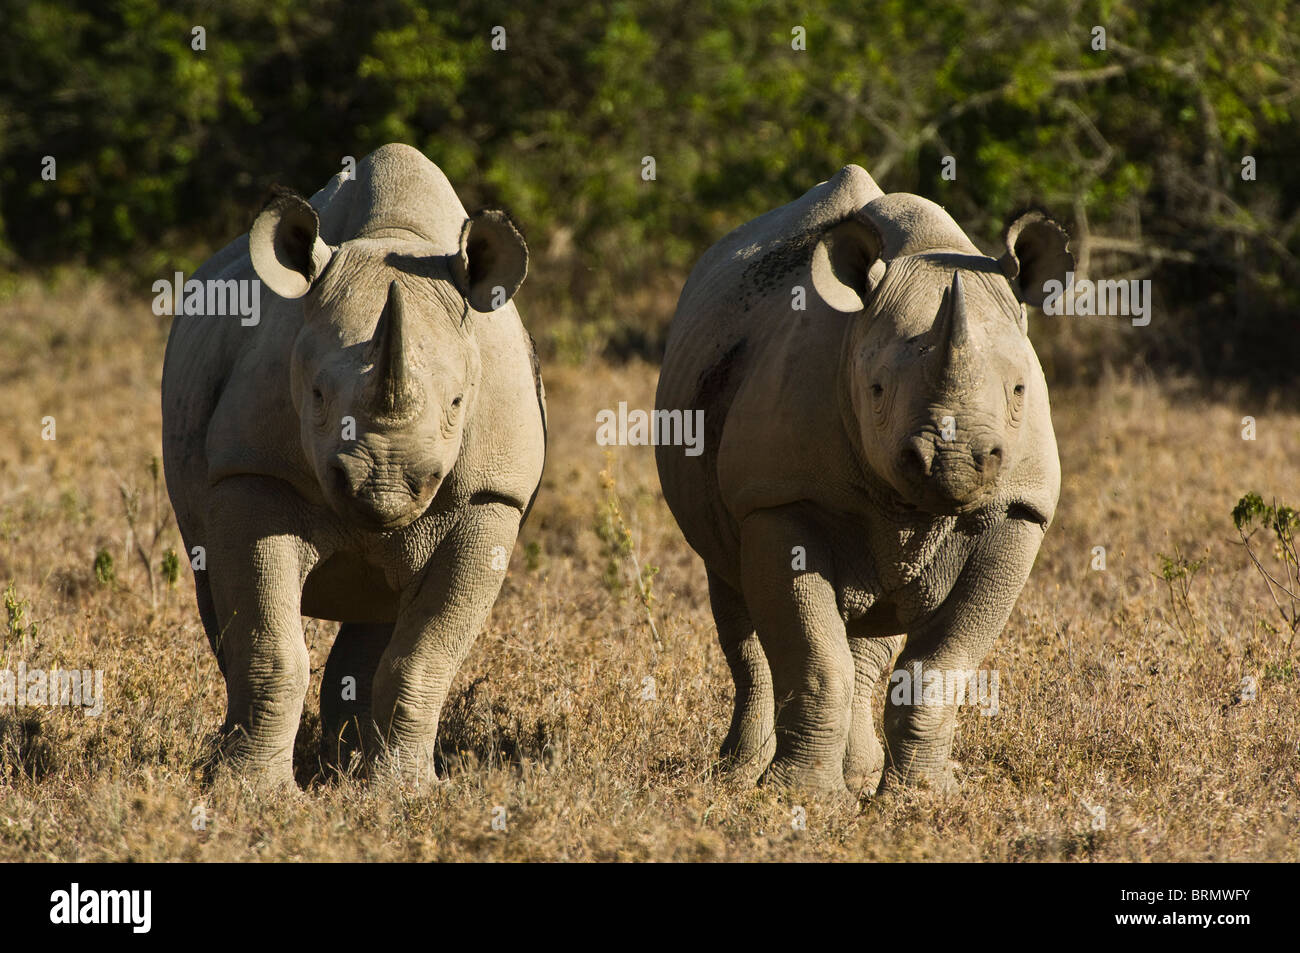 Two Black rhinoceros (Diceros bicornis michaeli) East African sub-species standing side by side Stock Photo